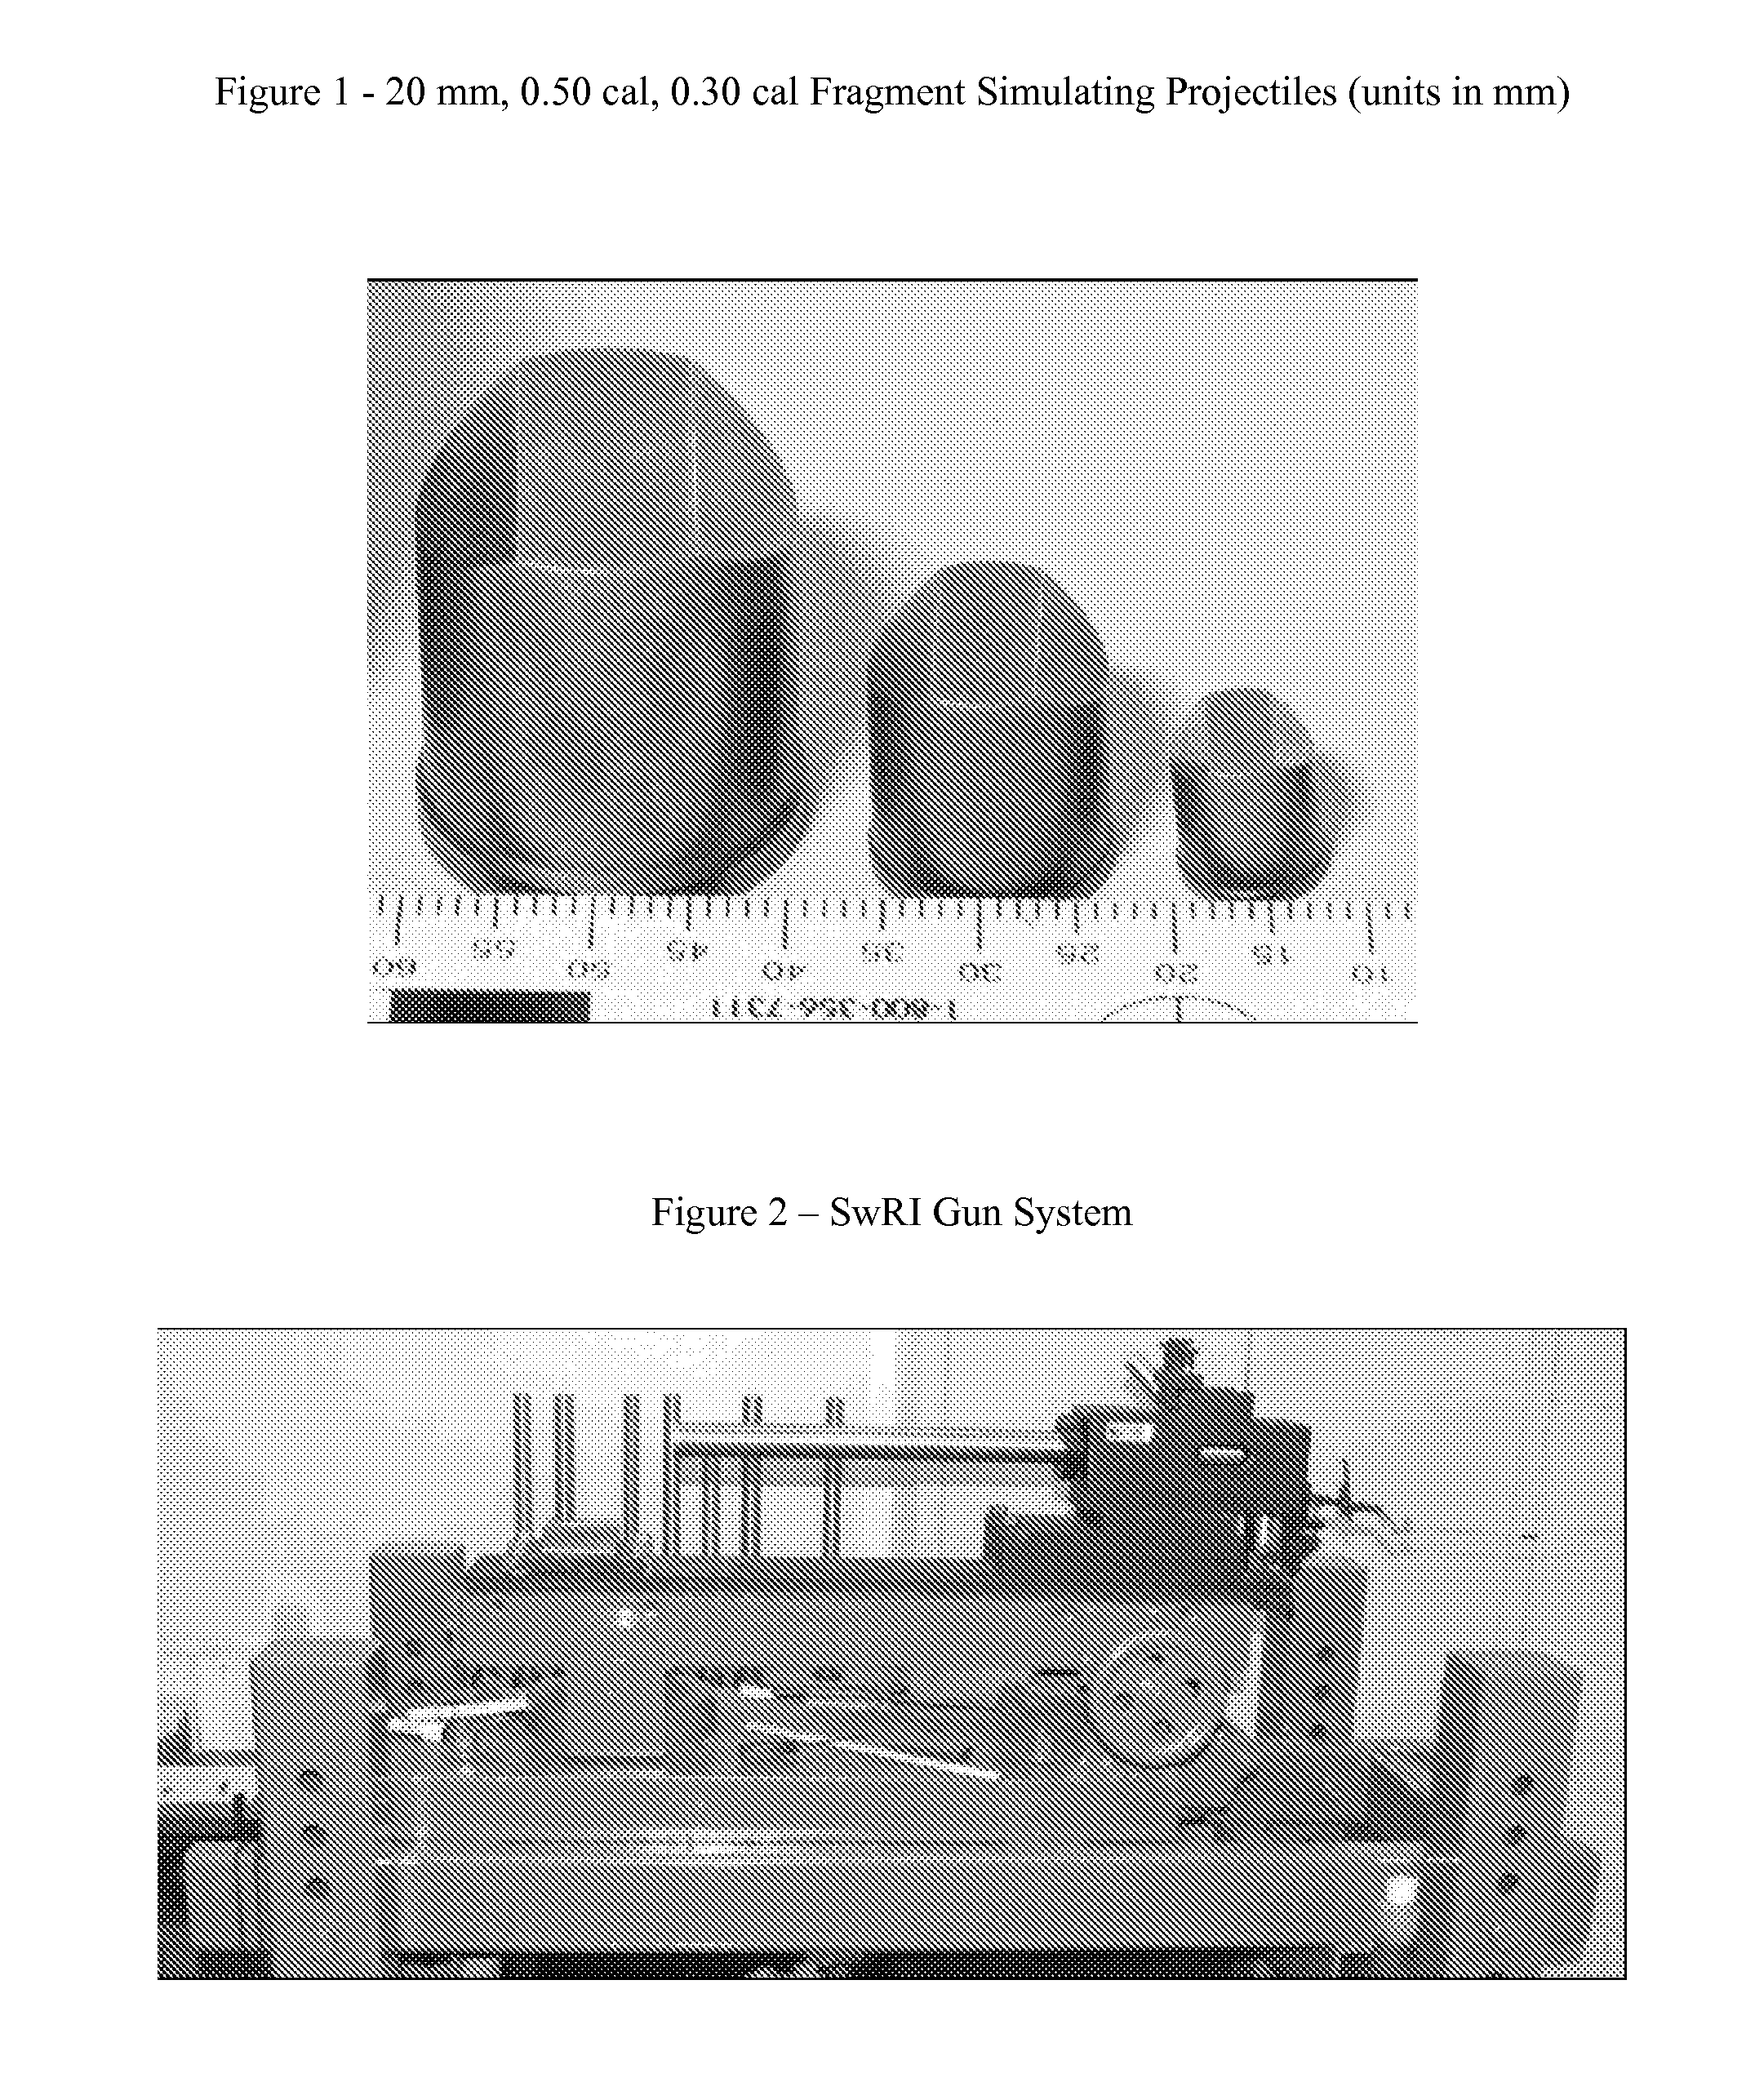 Products and methods for ballistic damage mitigation and blast damage suppression